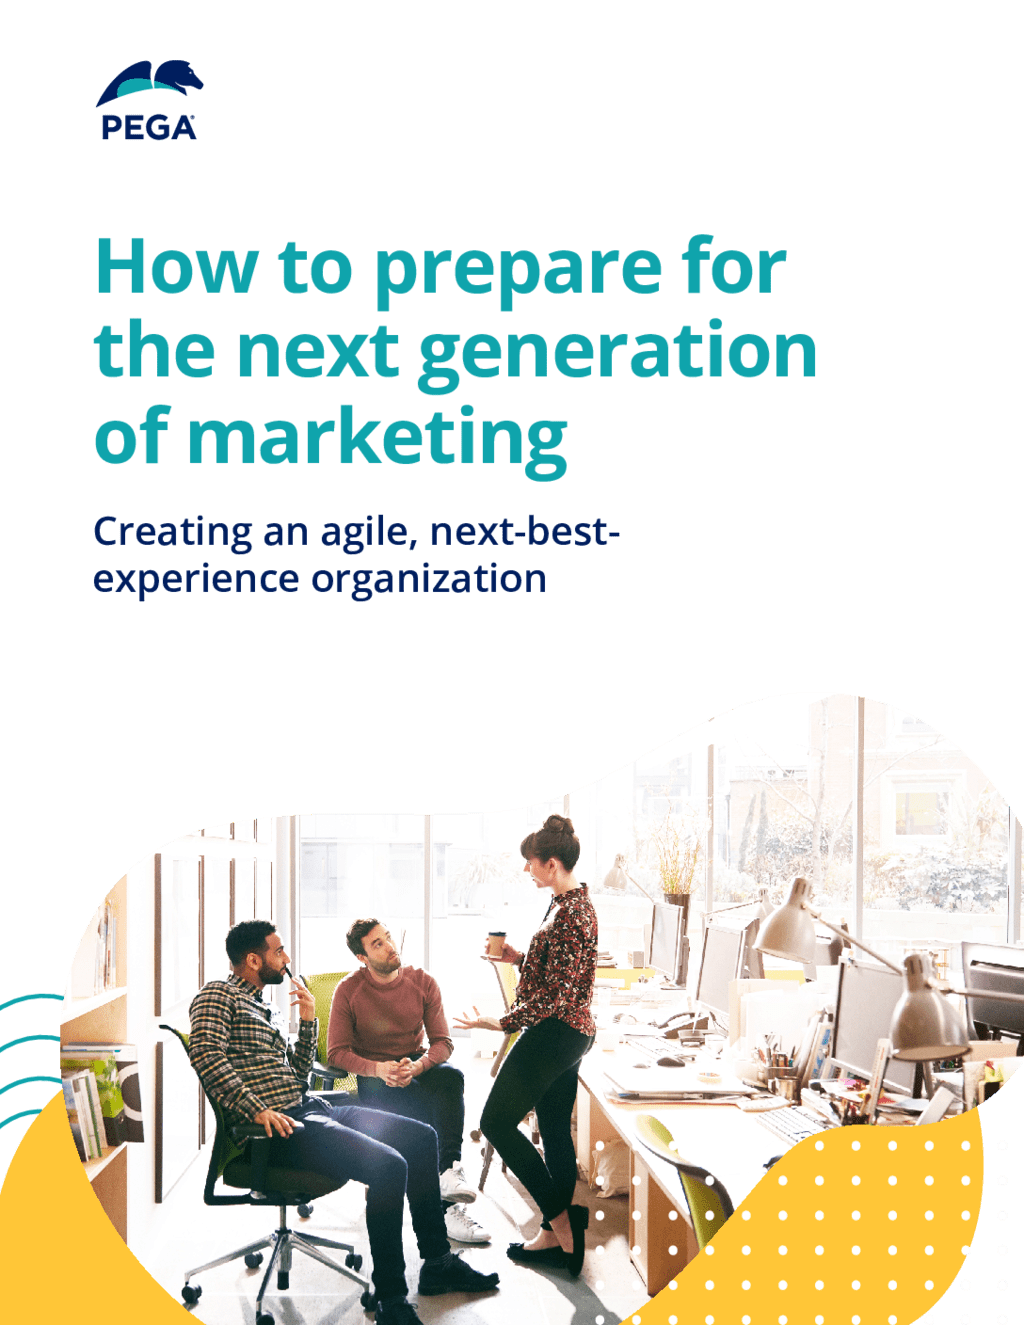 How to prepare for the next generation of marketing